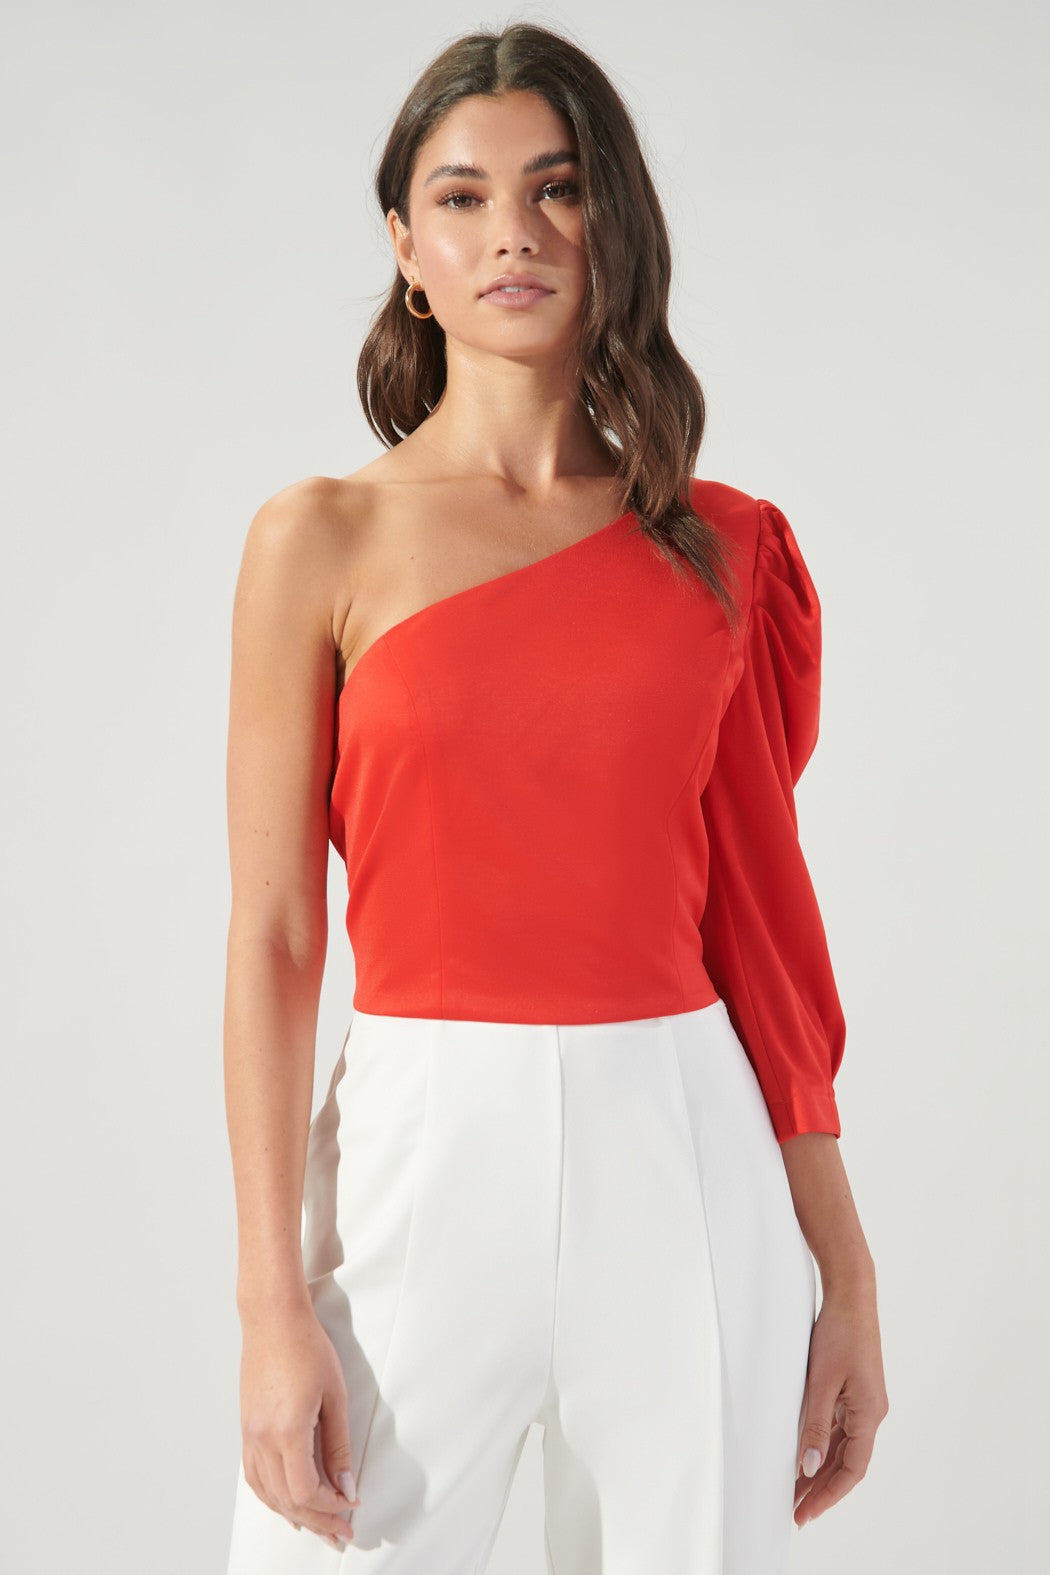 SUCH A BETTY ONE SHOULDER TOP - RED